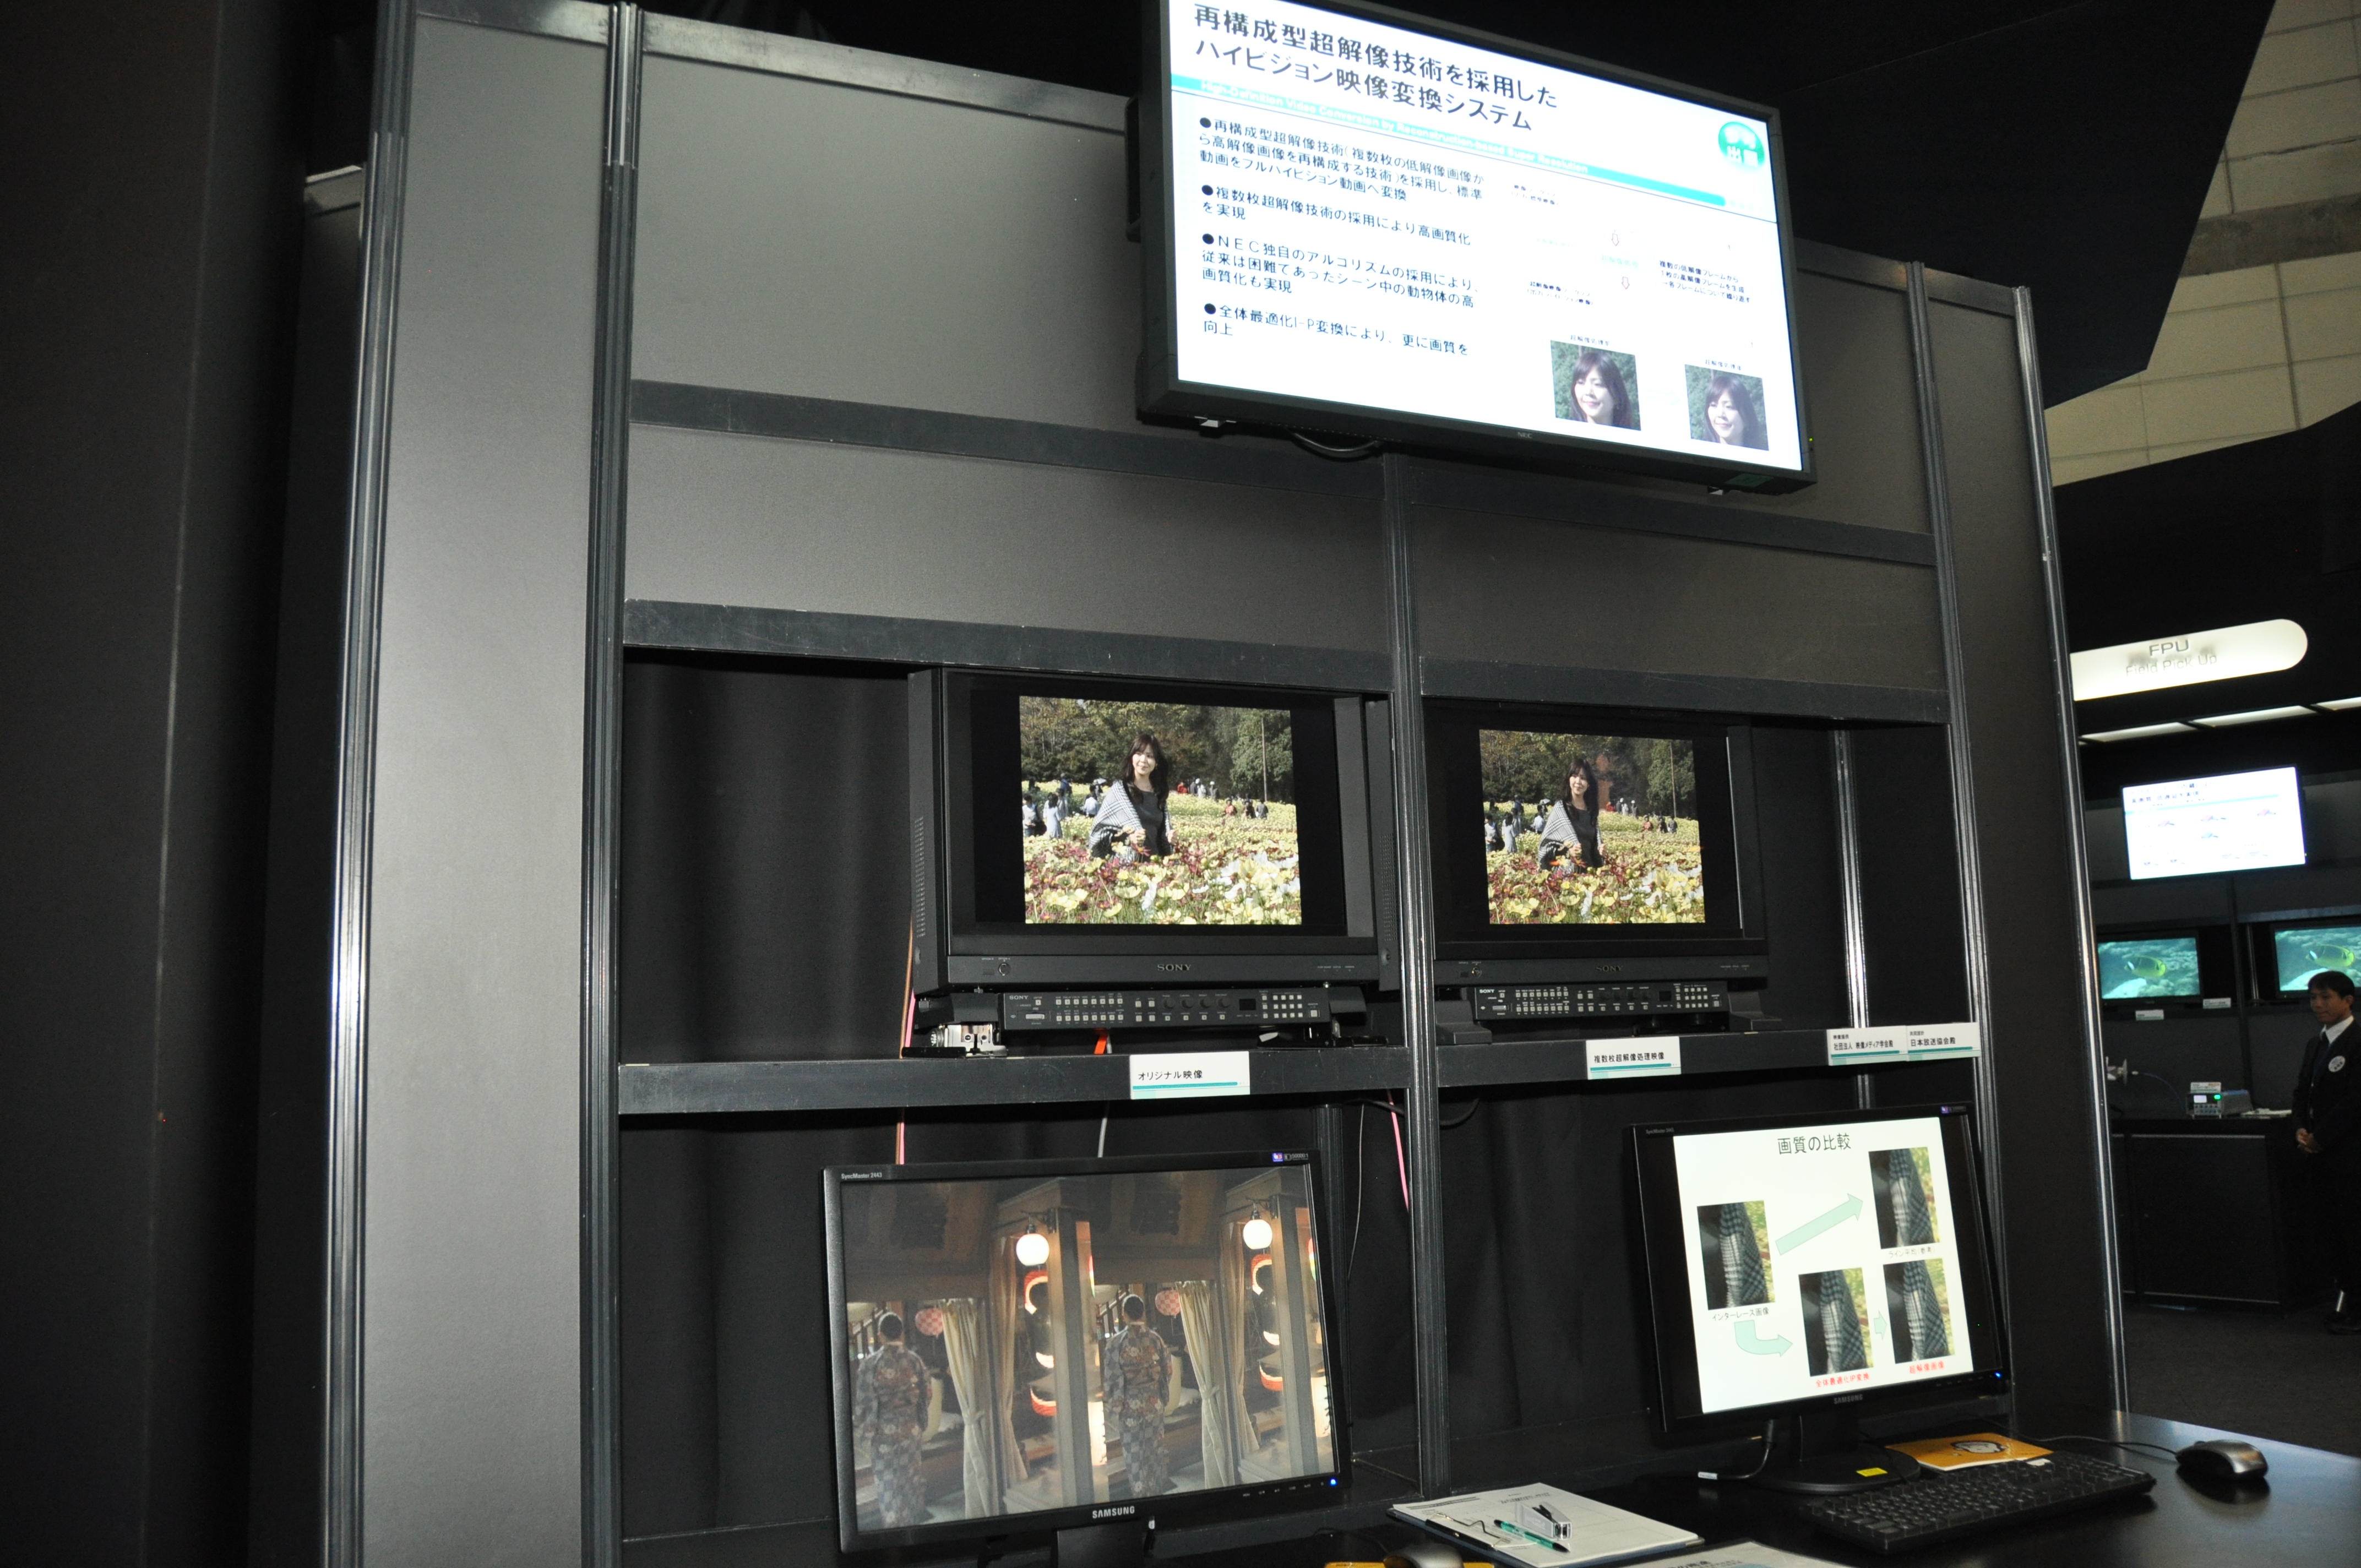 NEC showed off its high resolution technology to boost archival film quality